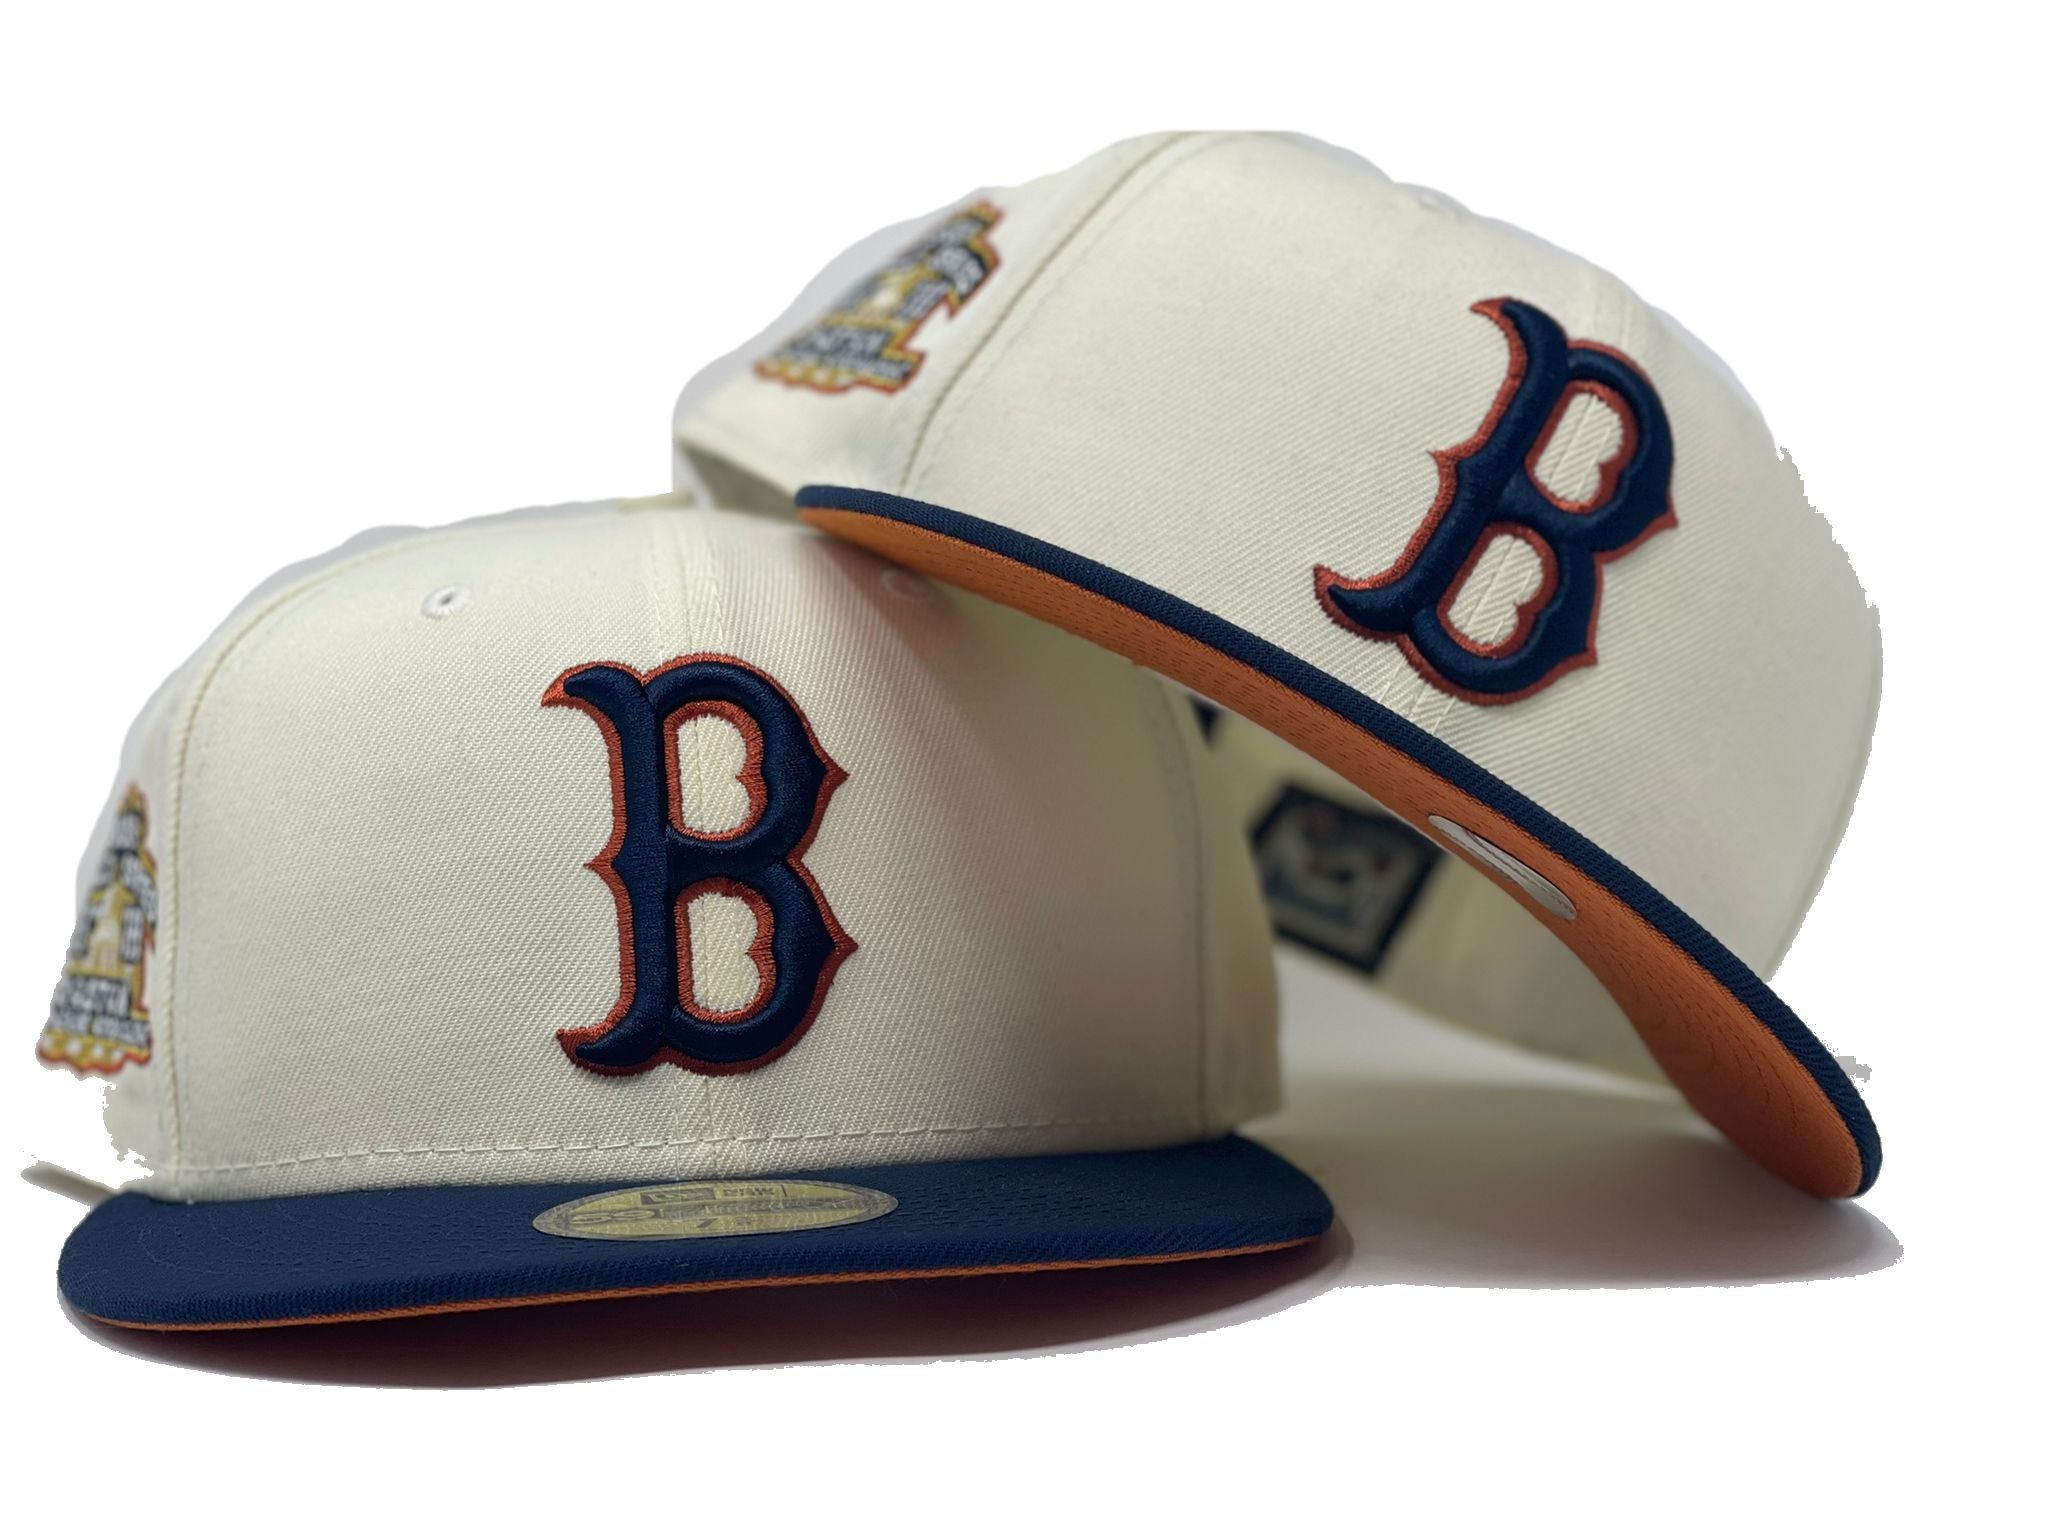 Boston Red Sox 1903 World Series Side Patch New Era Fitted Hat – Sports  World 165